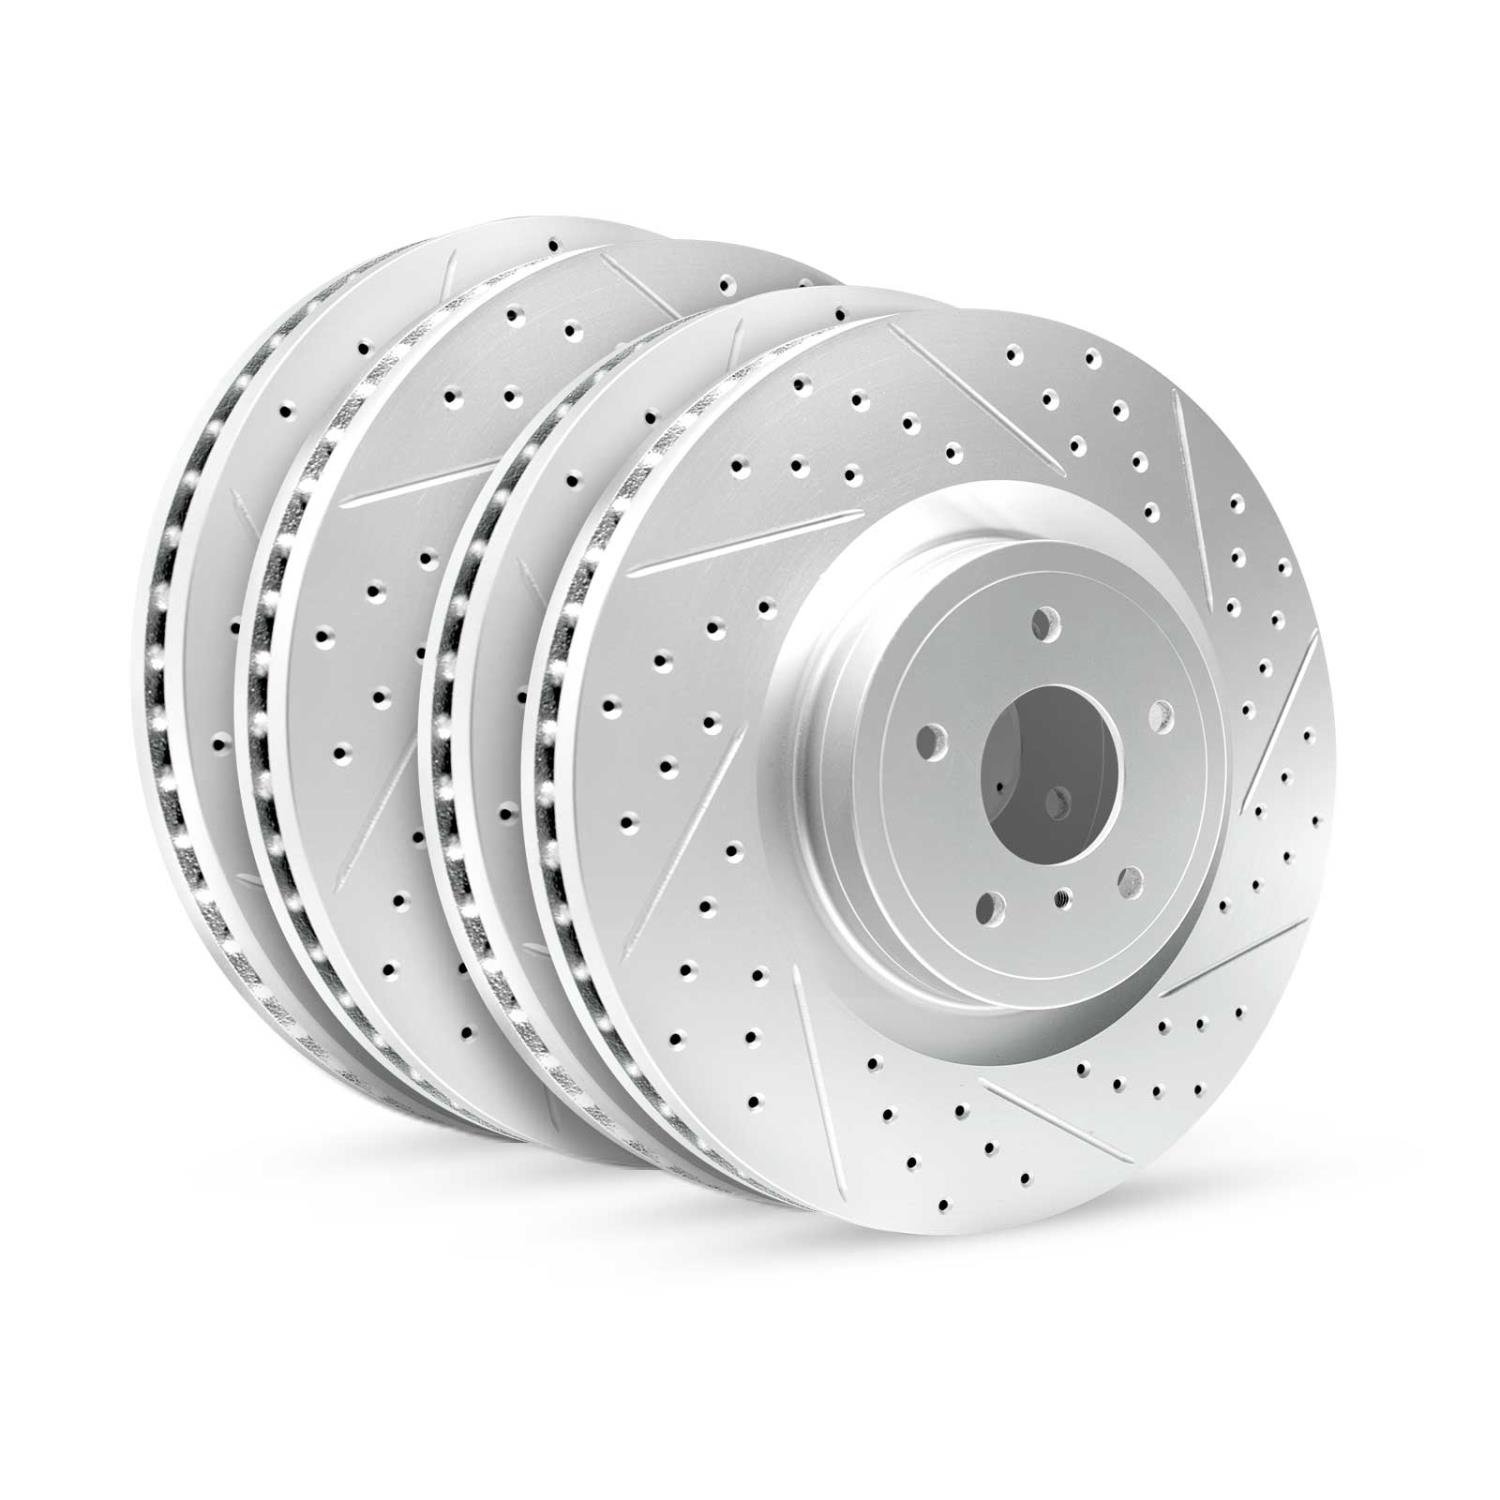 GEO-Carbon Drilled/Slotted Rotors, 2001-2008 Fits Multiple